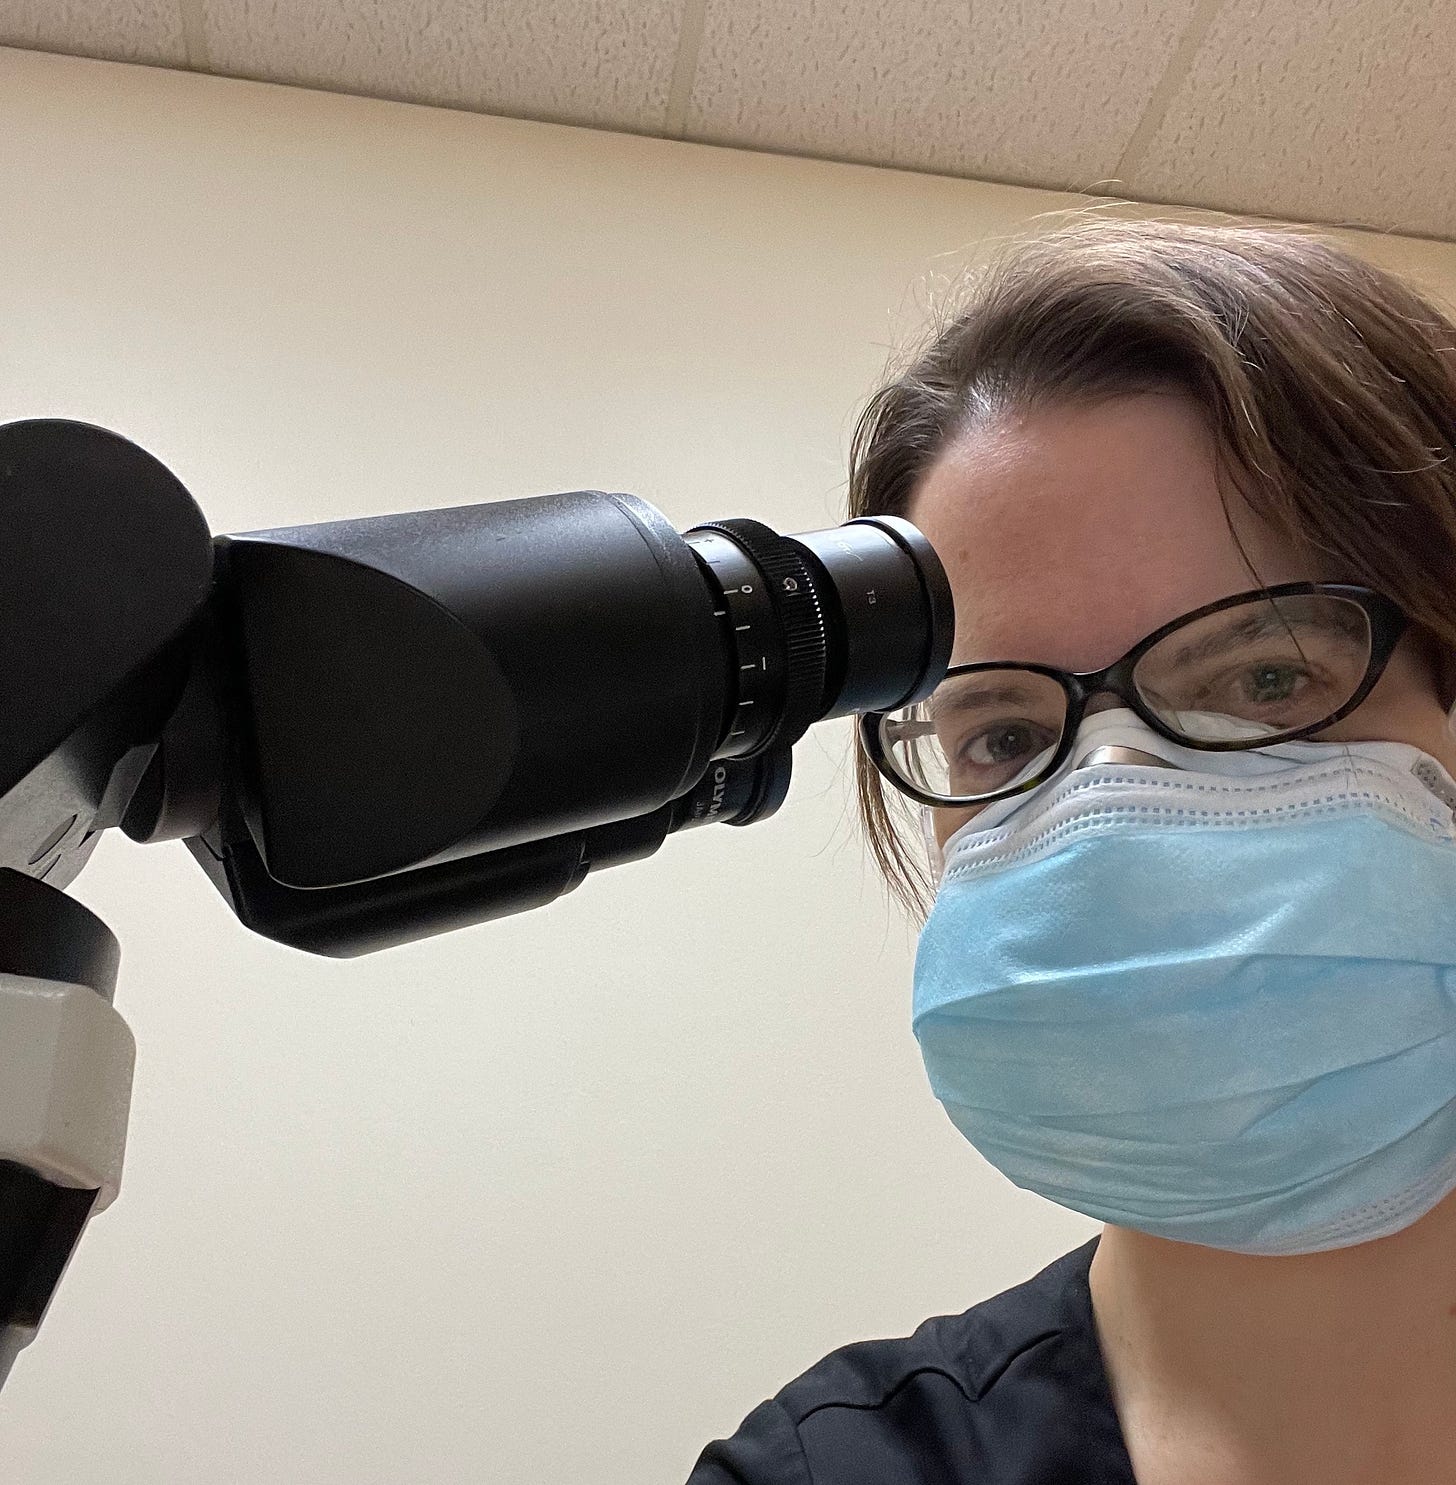 A woman wearing glasses and double masking with a respirator and surgical mask sits in front of a microscope.